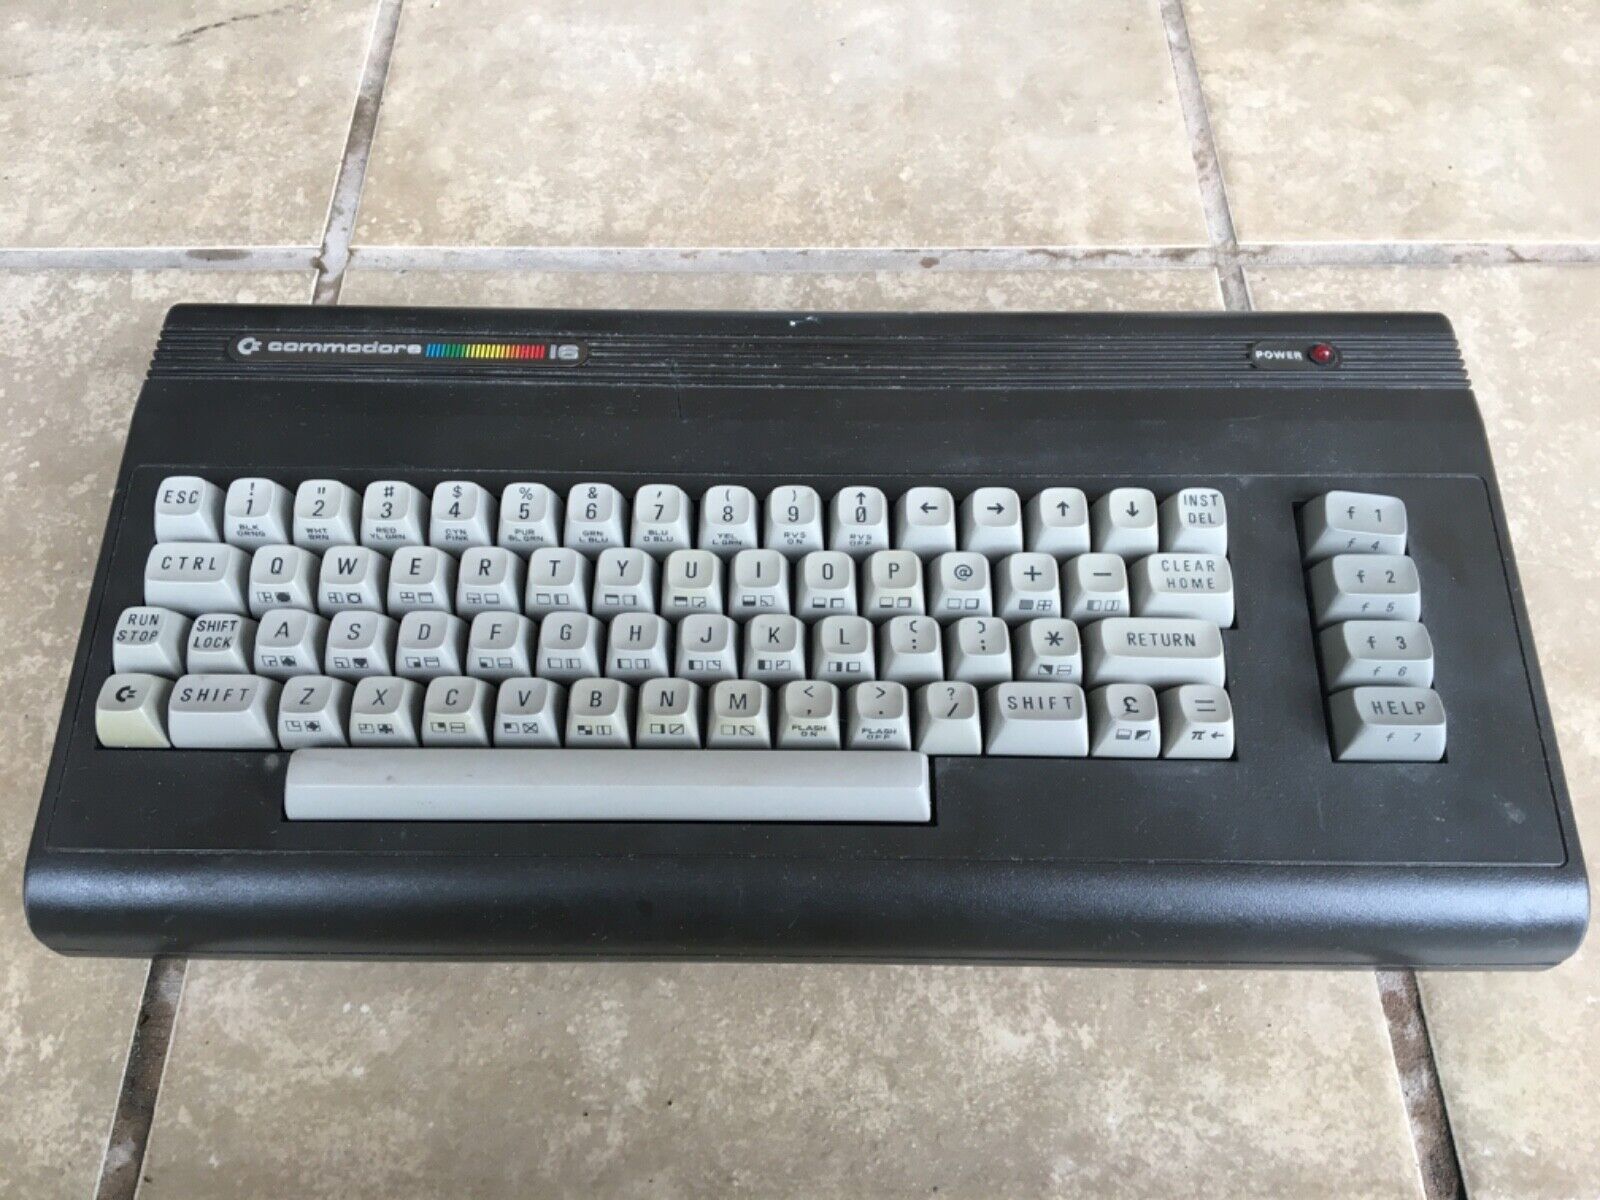 Commodore 16 C16 64k Ram Home Computer Keyboard Power Tested Only